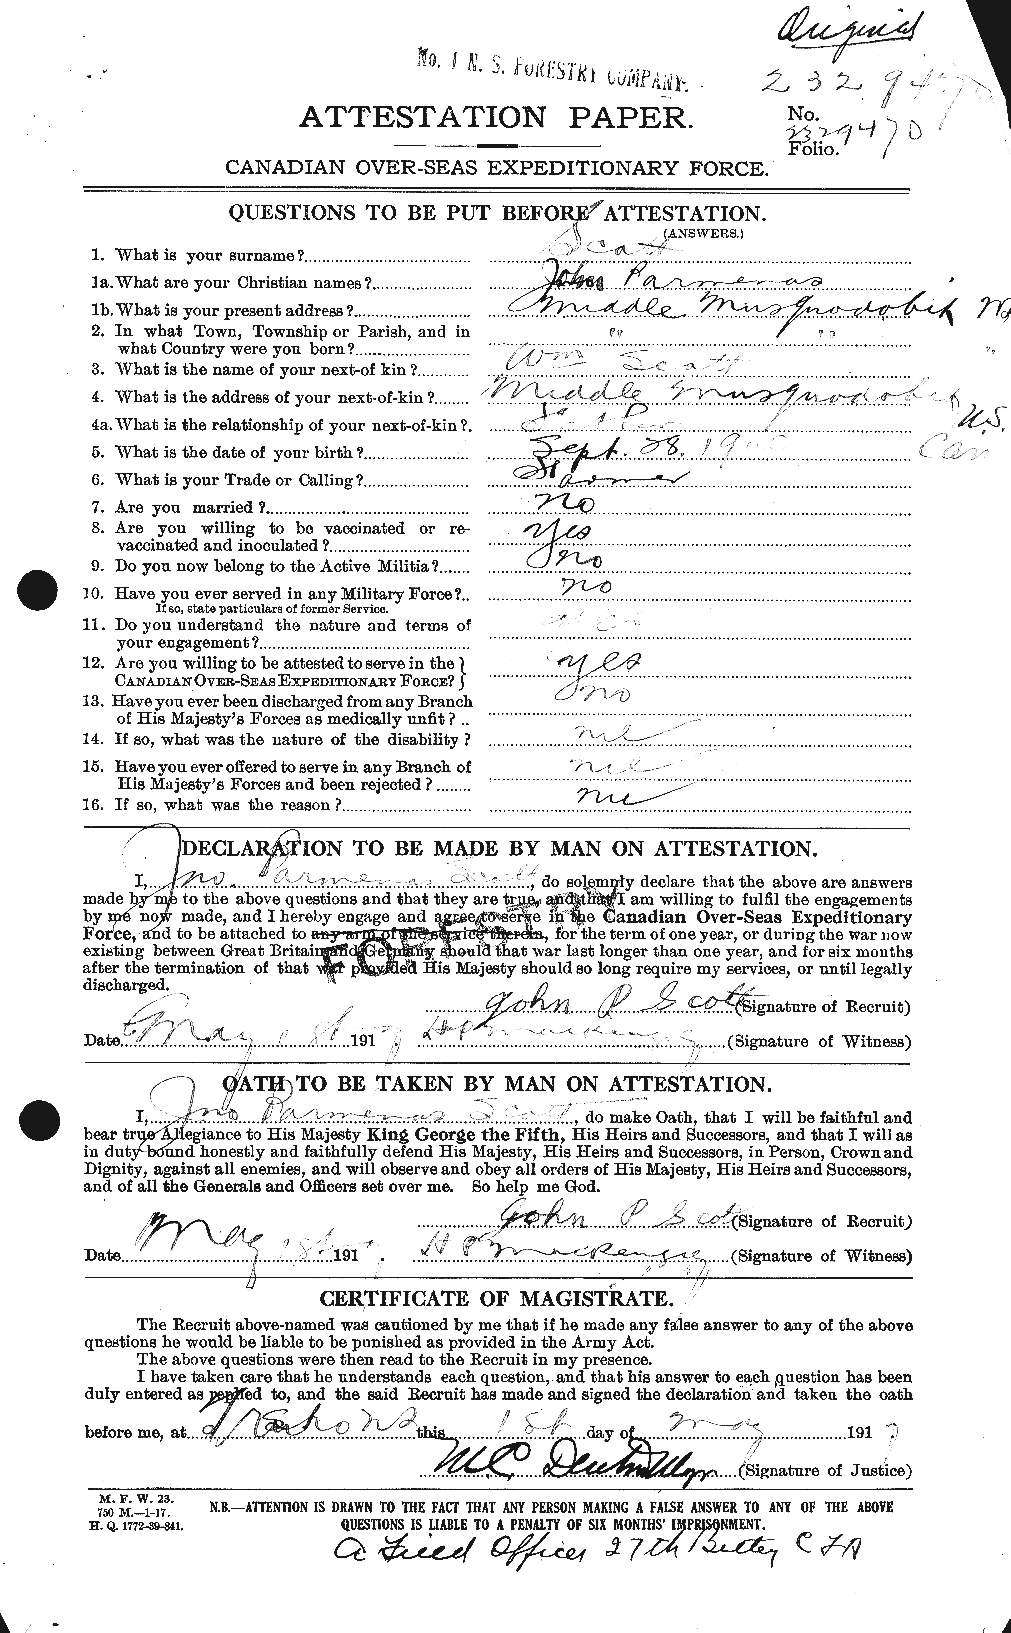 Personnel Records of the First World War - CEF 084438a